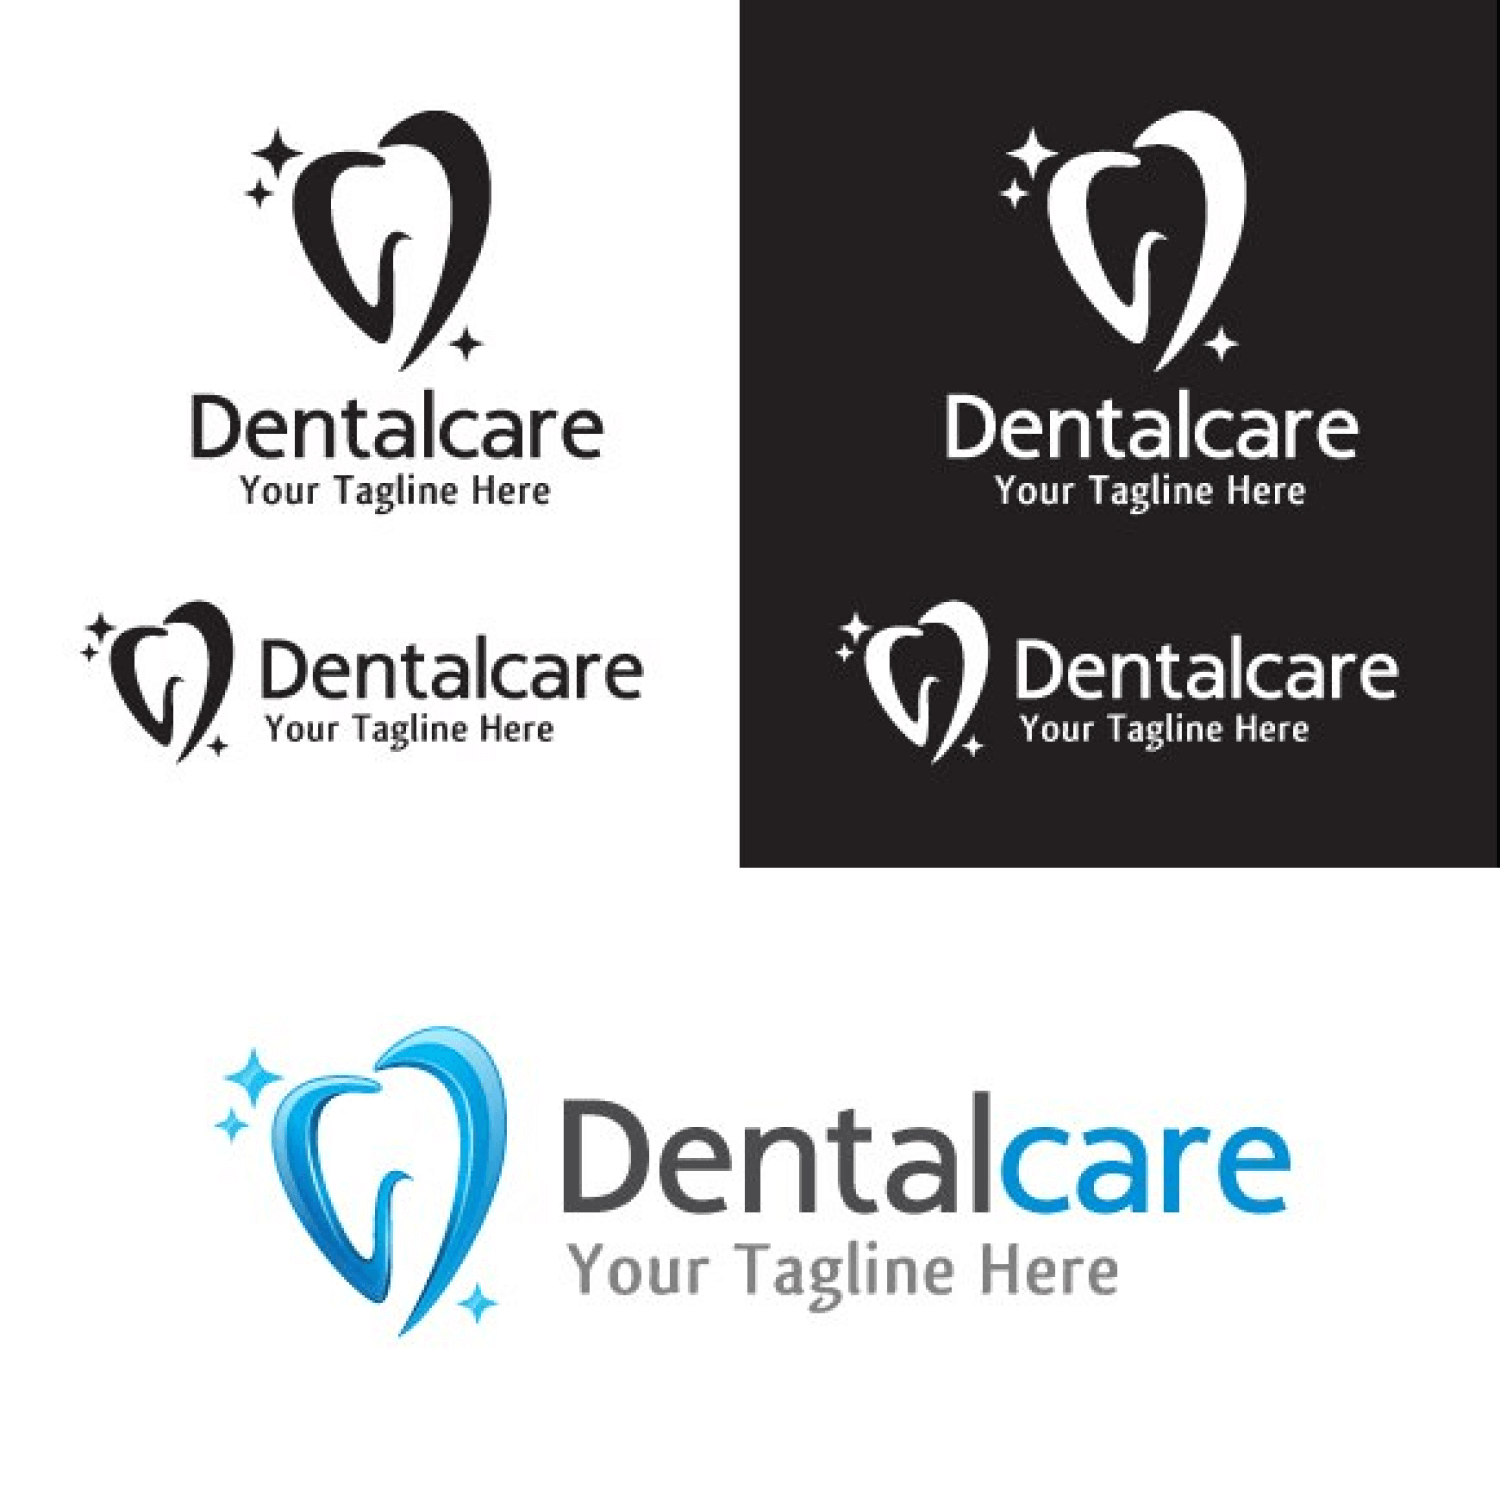 Dentalcare on Various Background.